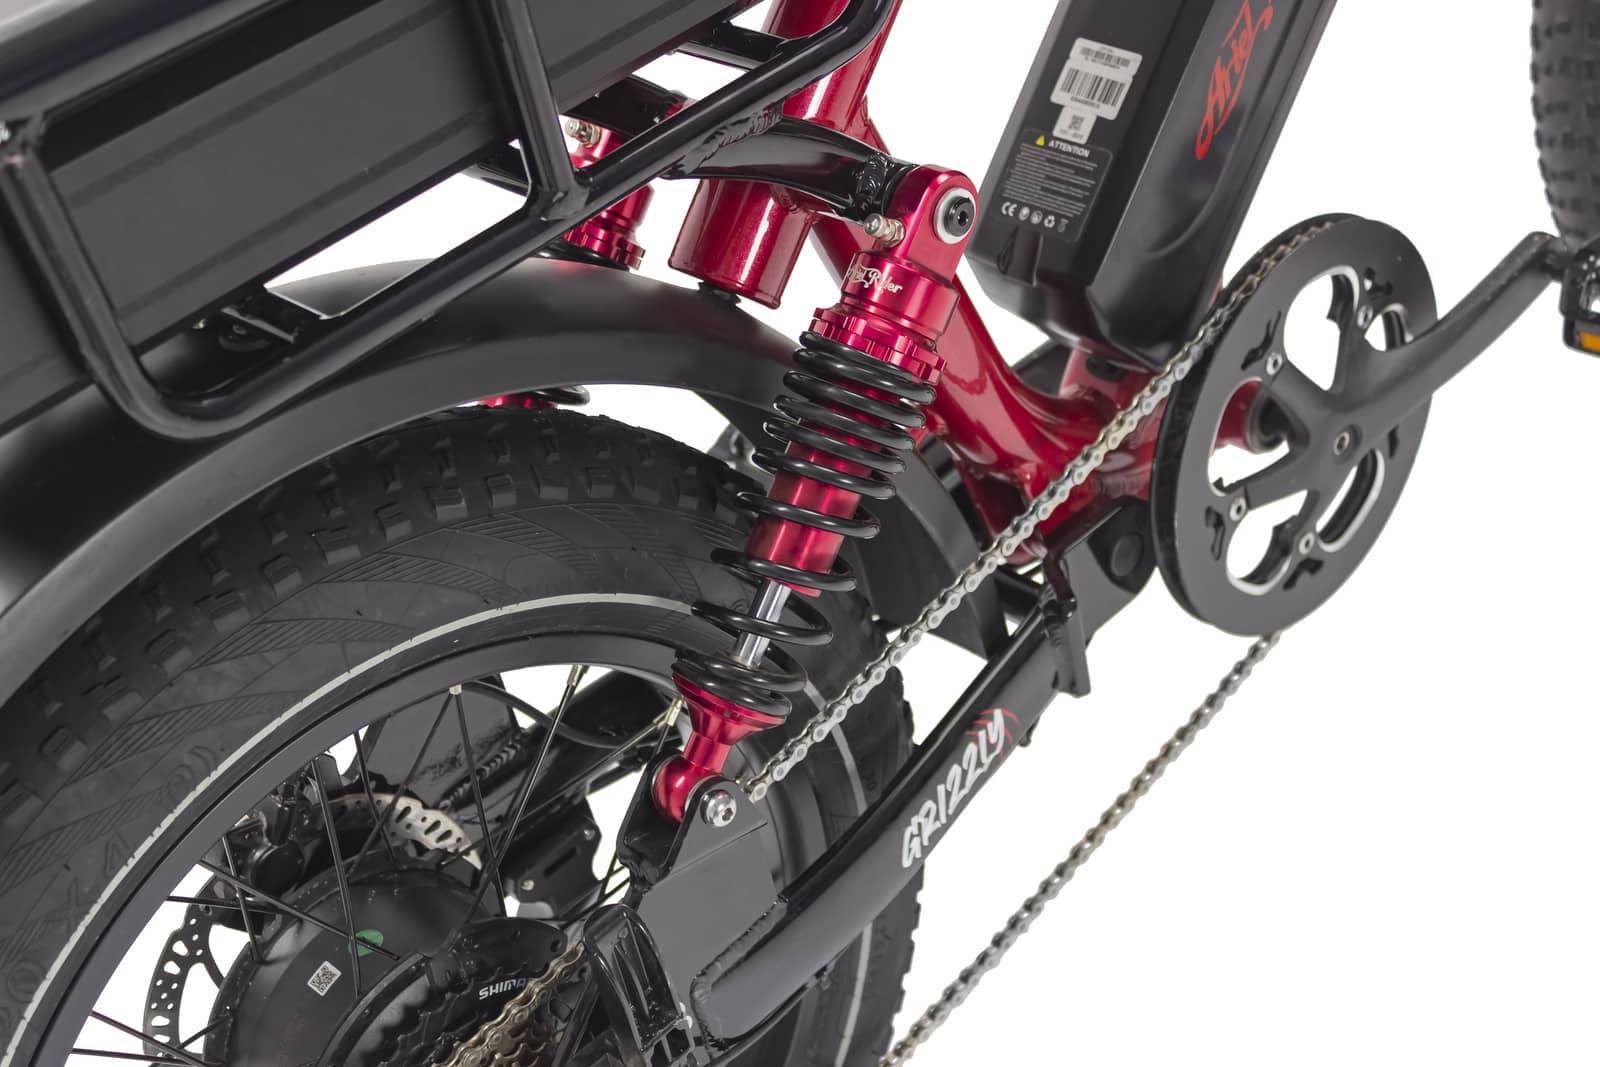 A photo of the Ariel Rider Grizzly All-Wheel-Drive e-bike, featuring advanced suspension system and superior shocks for a smooth and comfortable ride on any terrain.